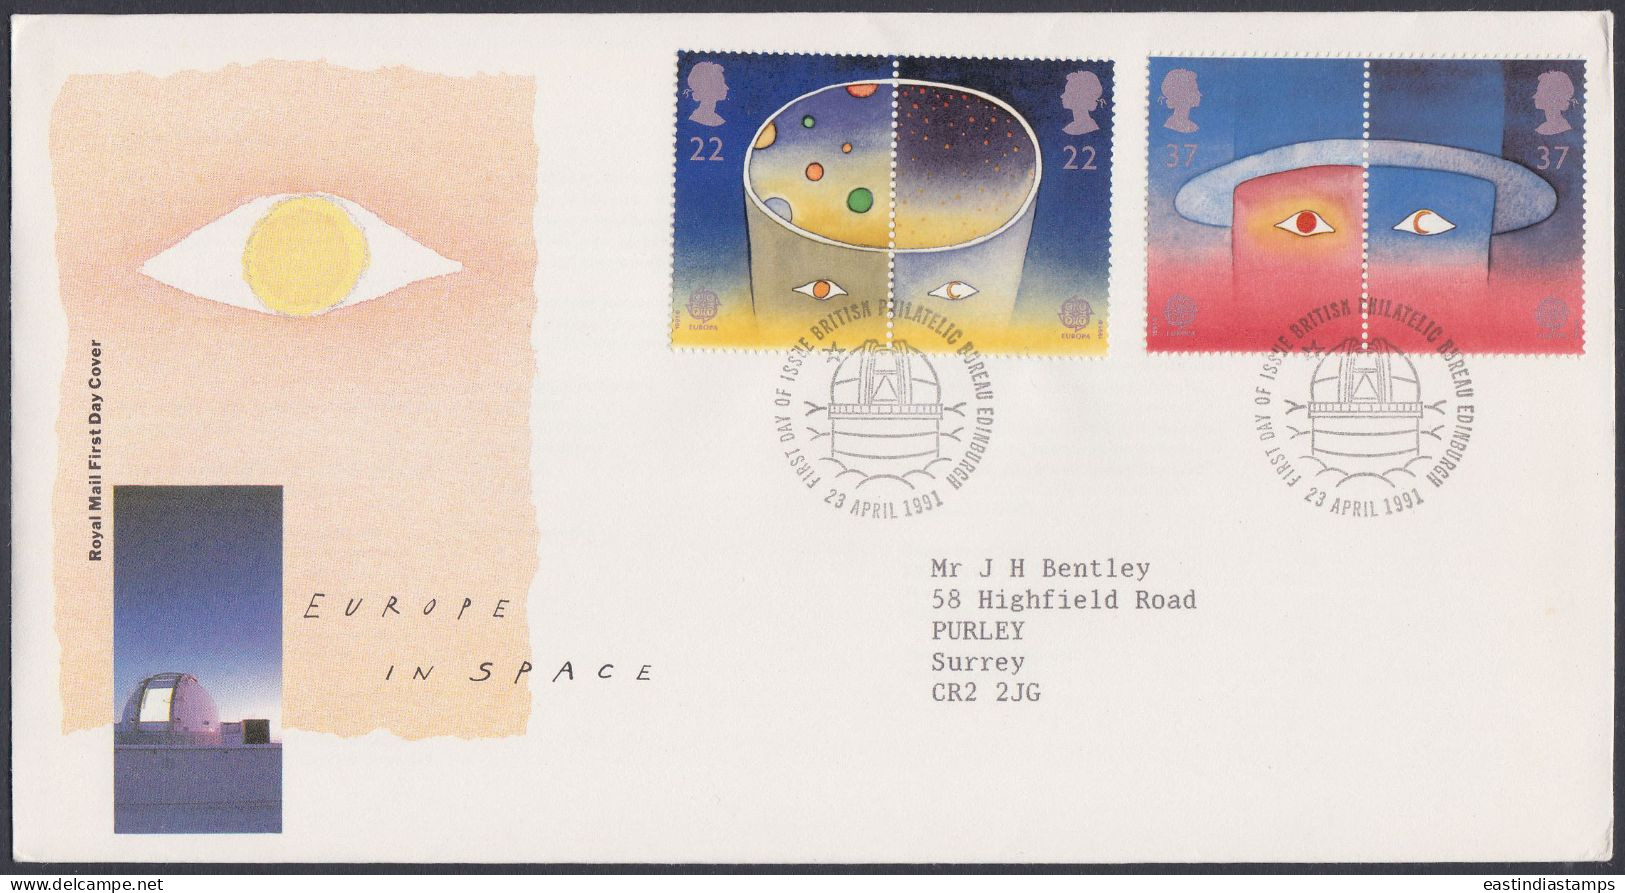 GB Great Britain 1991 FDC Europe In Space, Observatory, Stars, Planets, Pictorial Postmark, First Day Cover - Briefe U. Dokumente